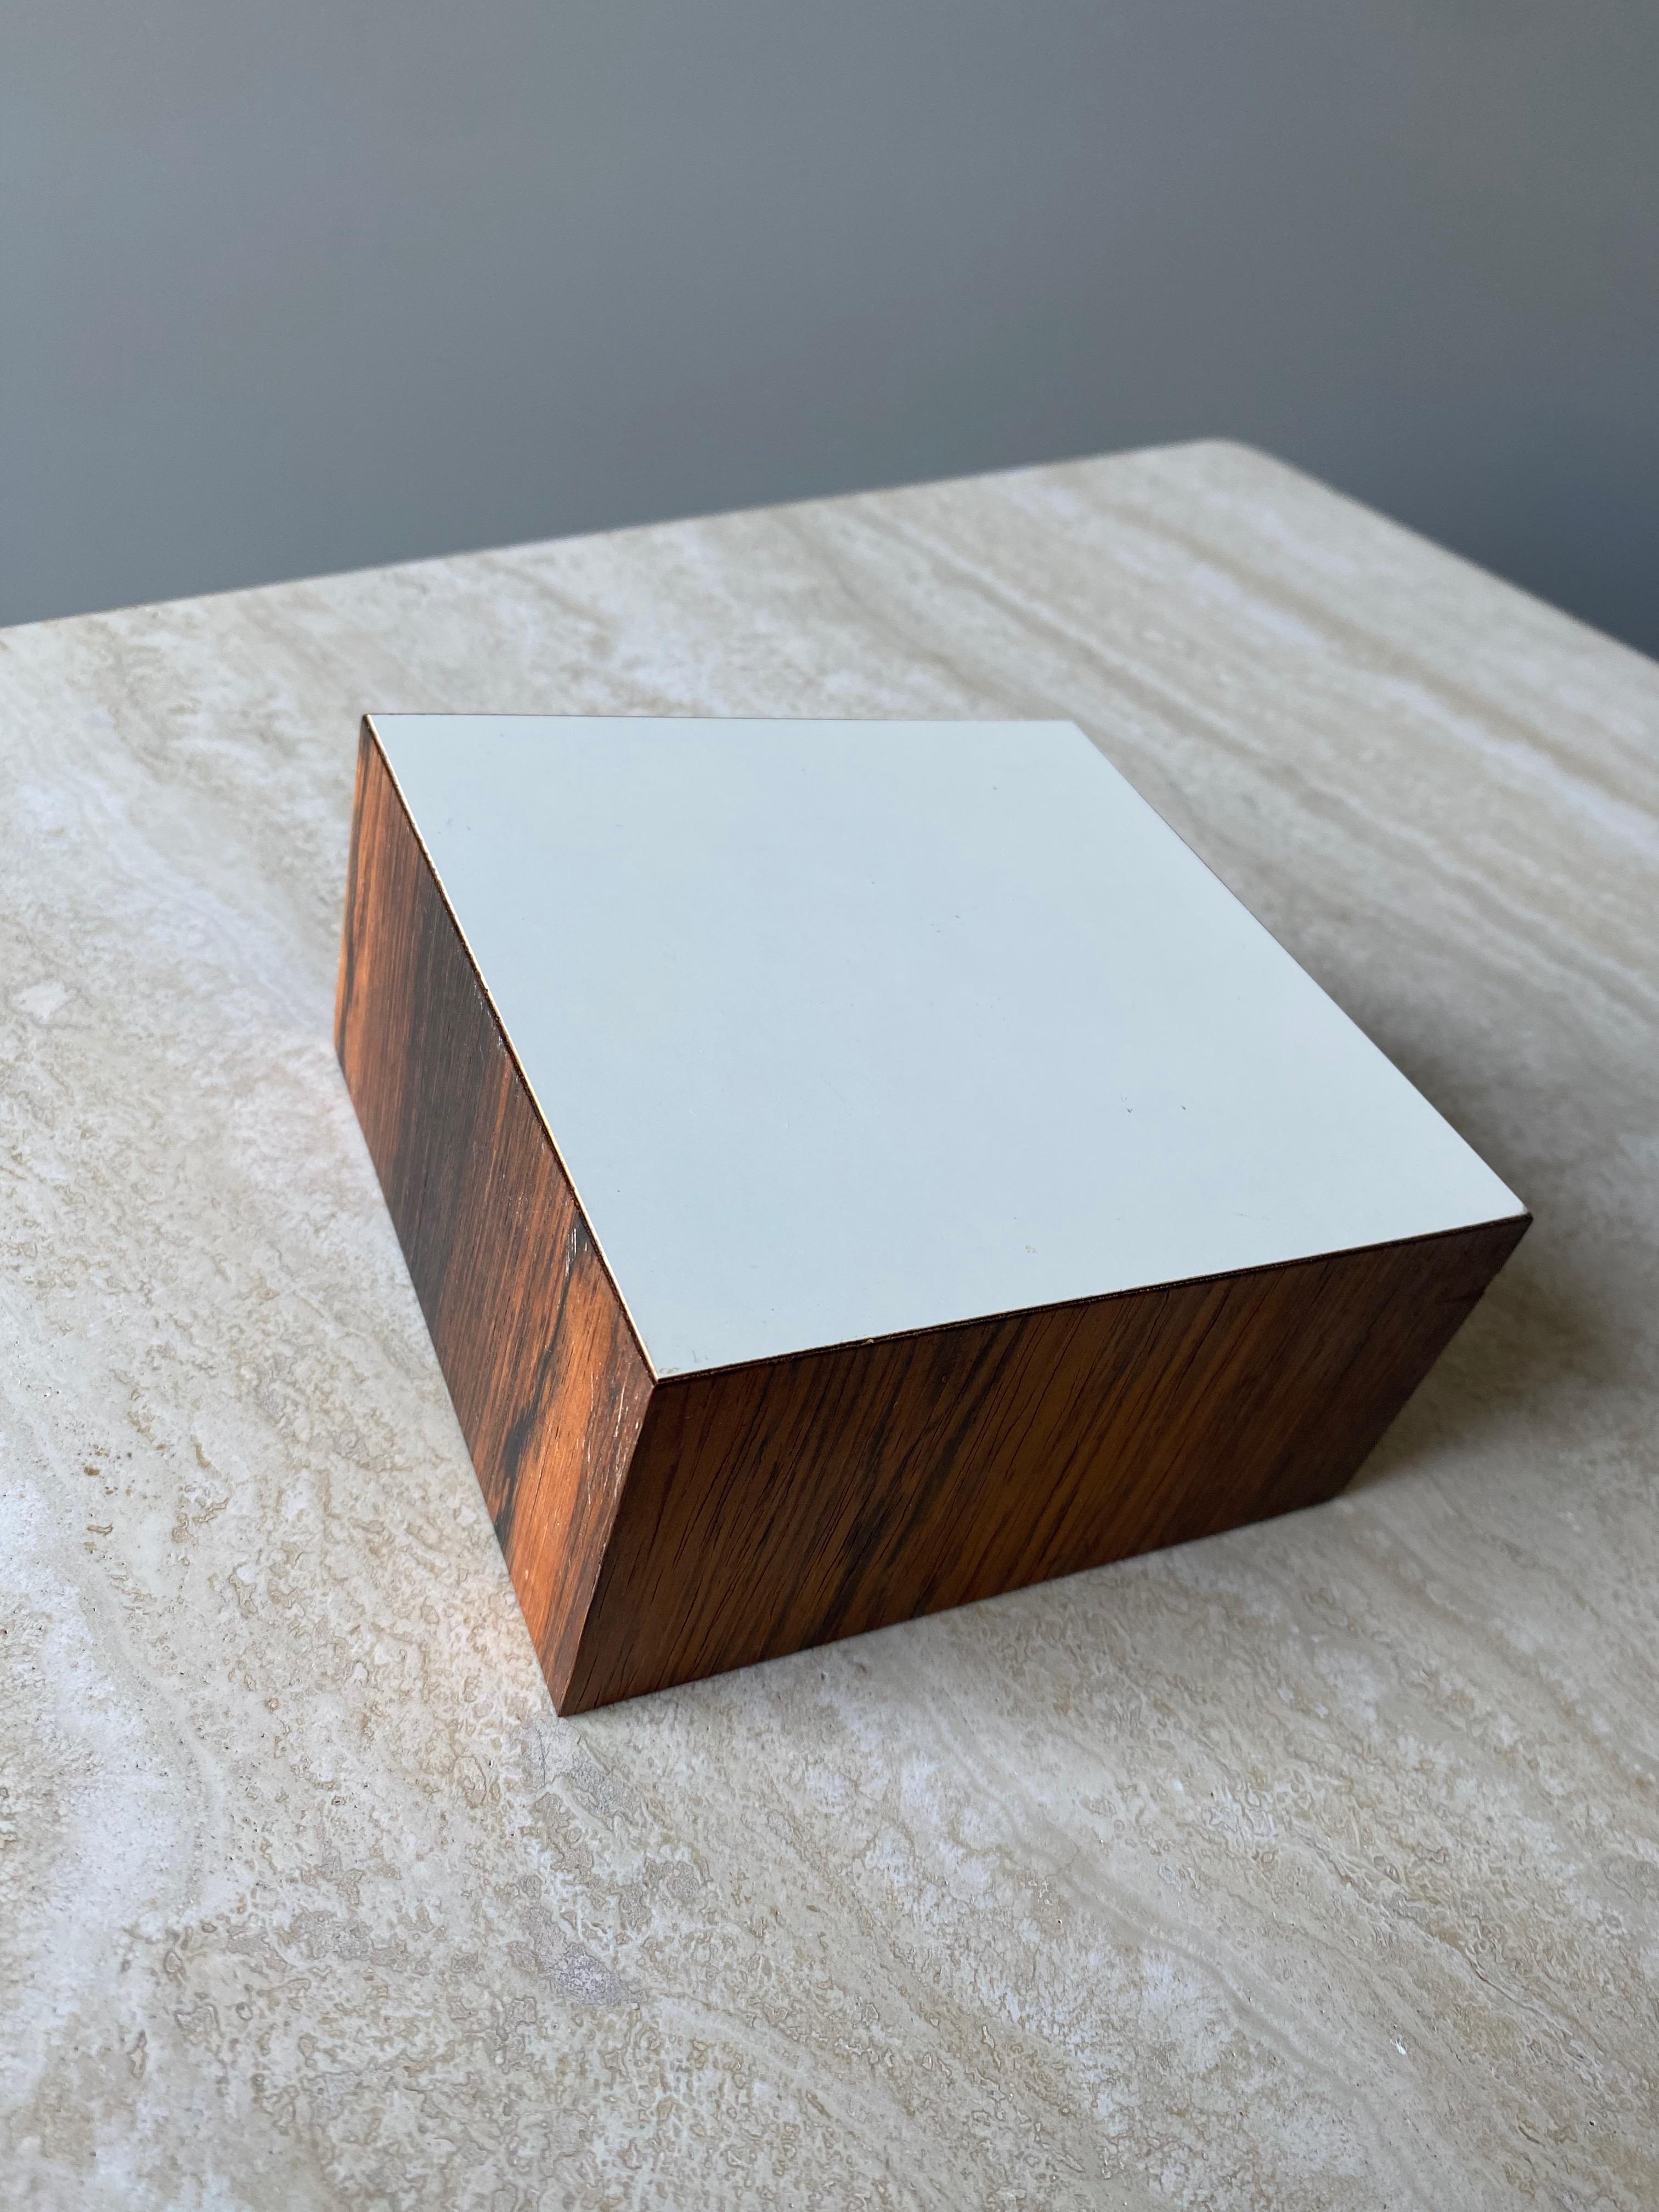 Walnut Display Cube, 1960s For Sale 9